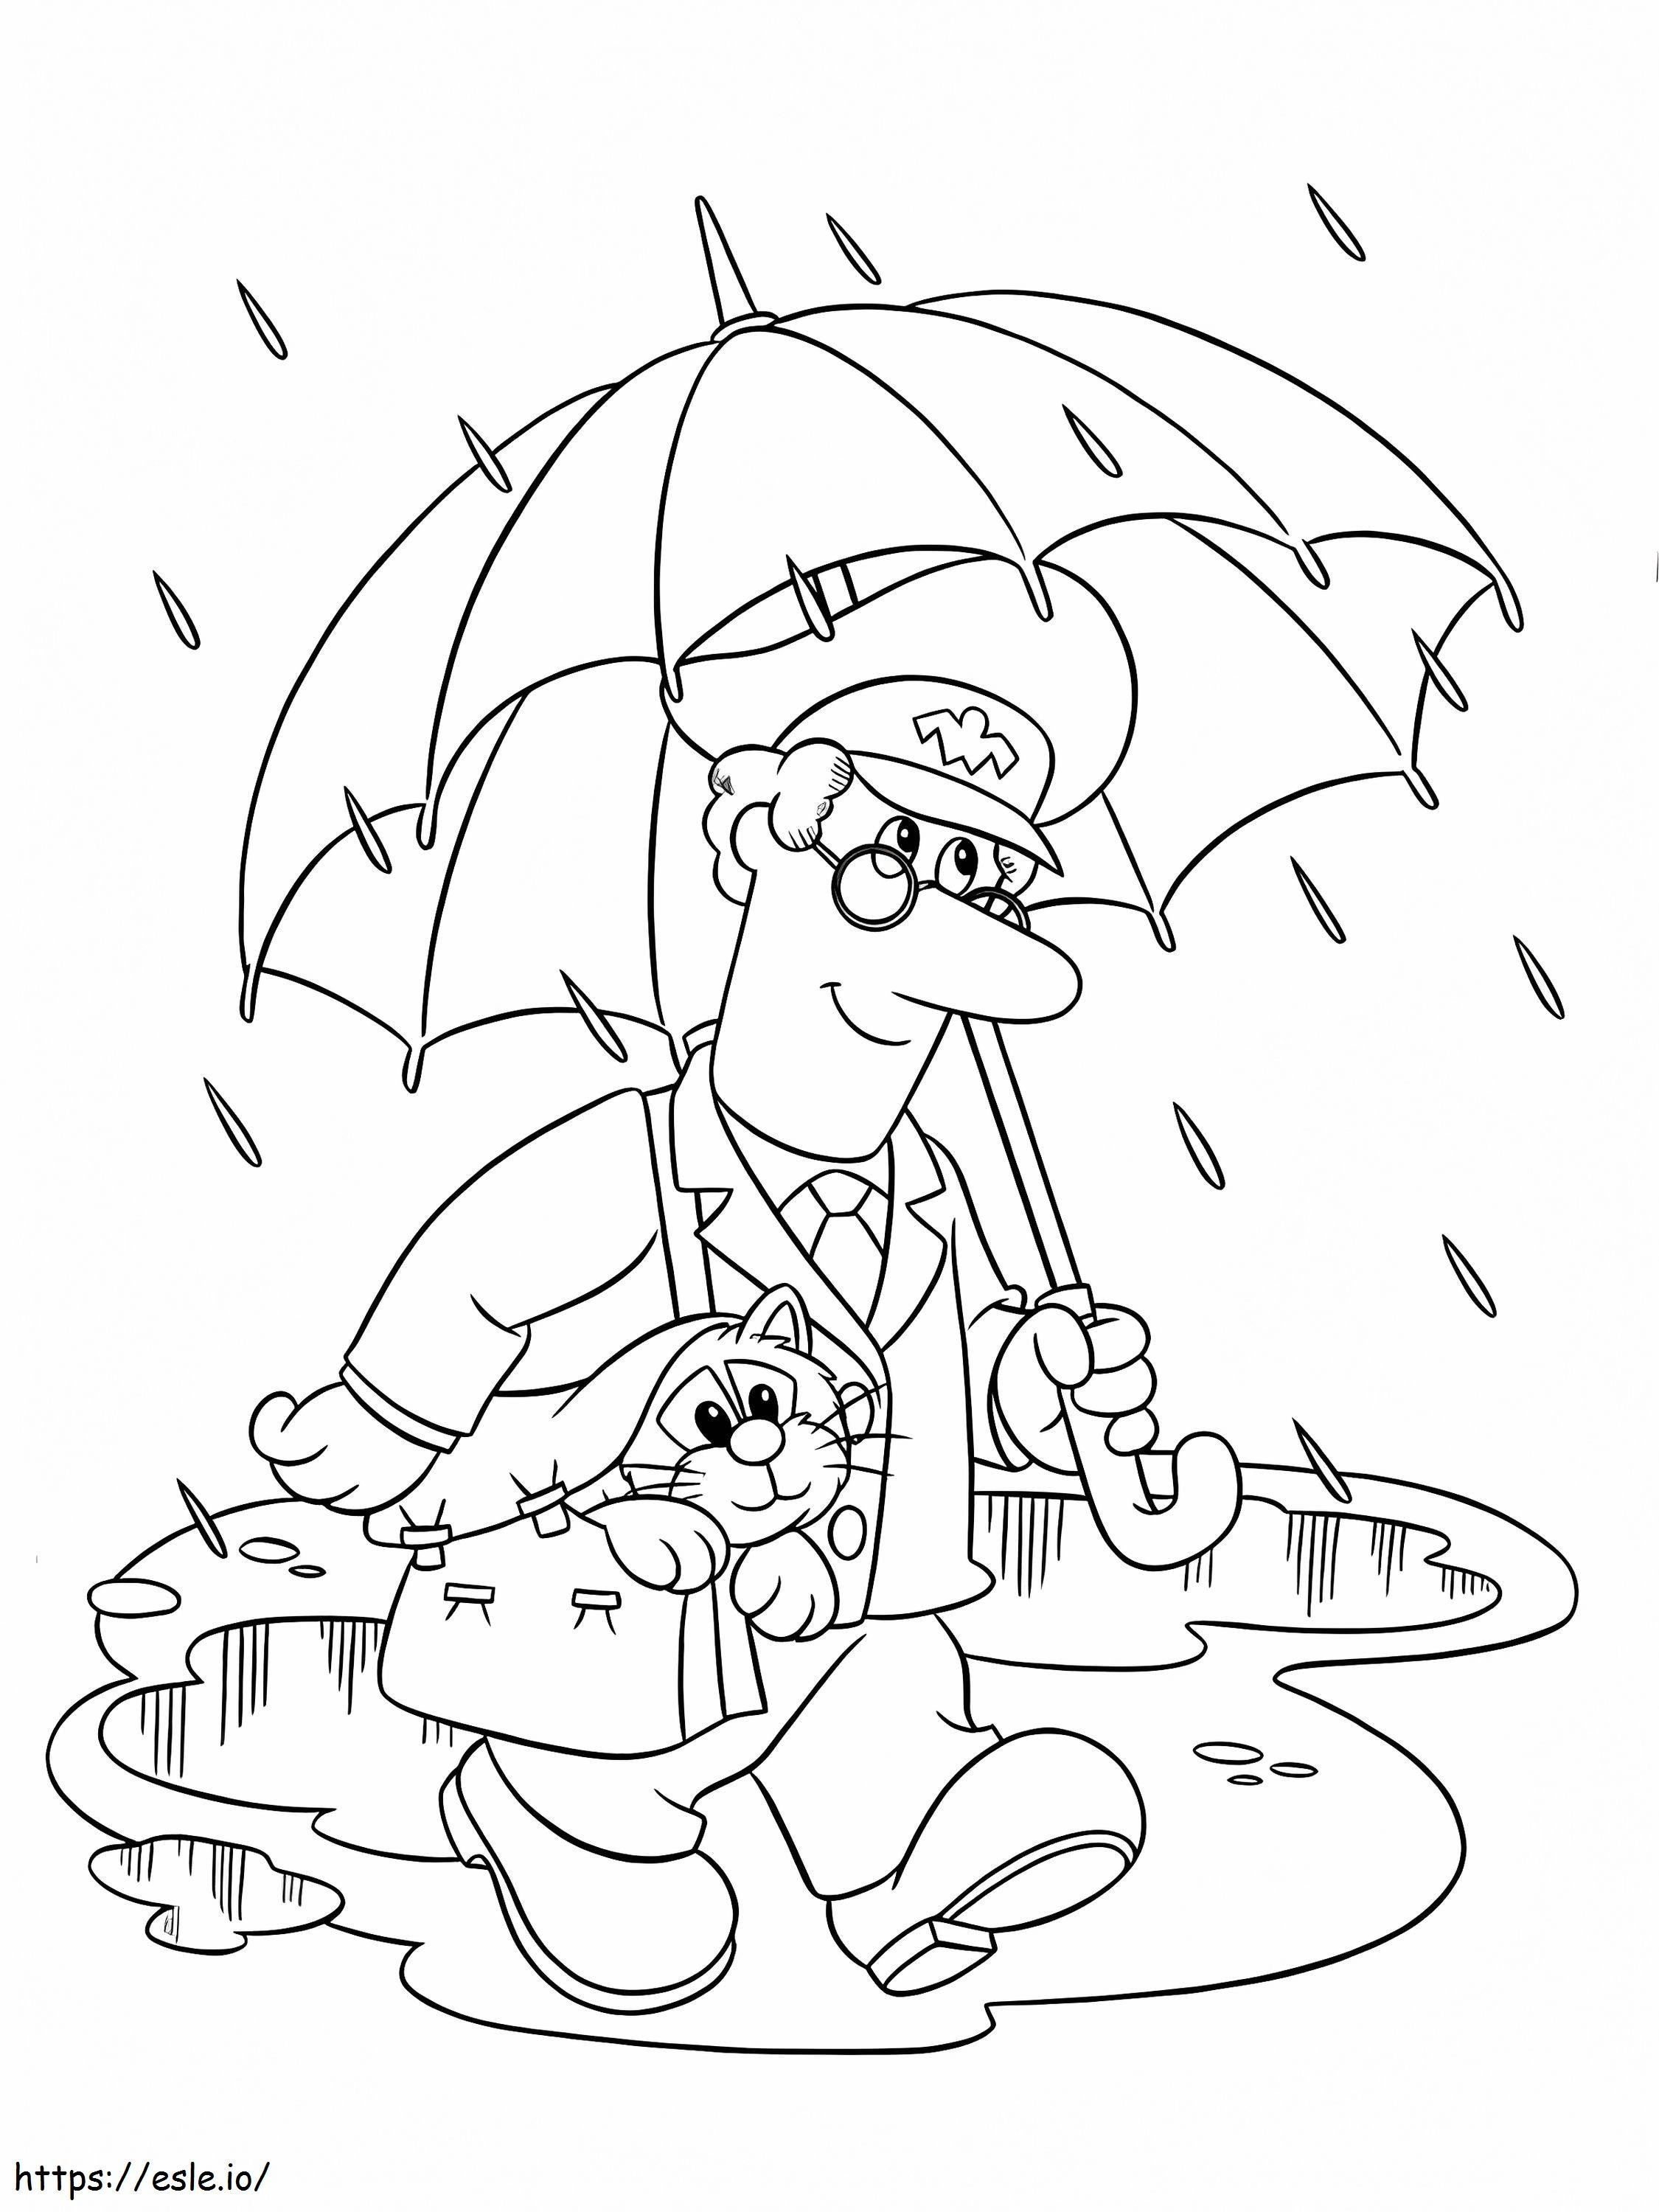 Pat The Postman And His Cat Walking In The Rain coloring page